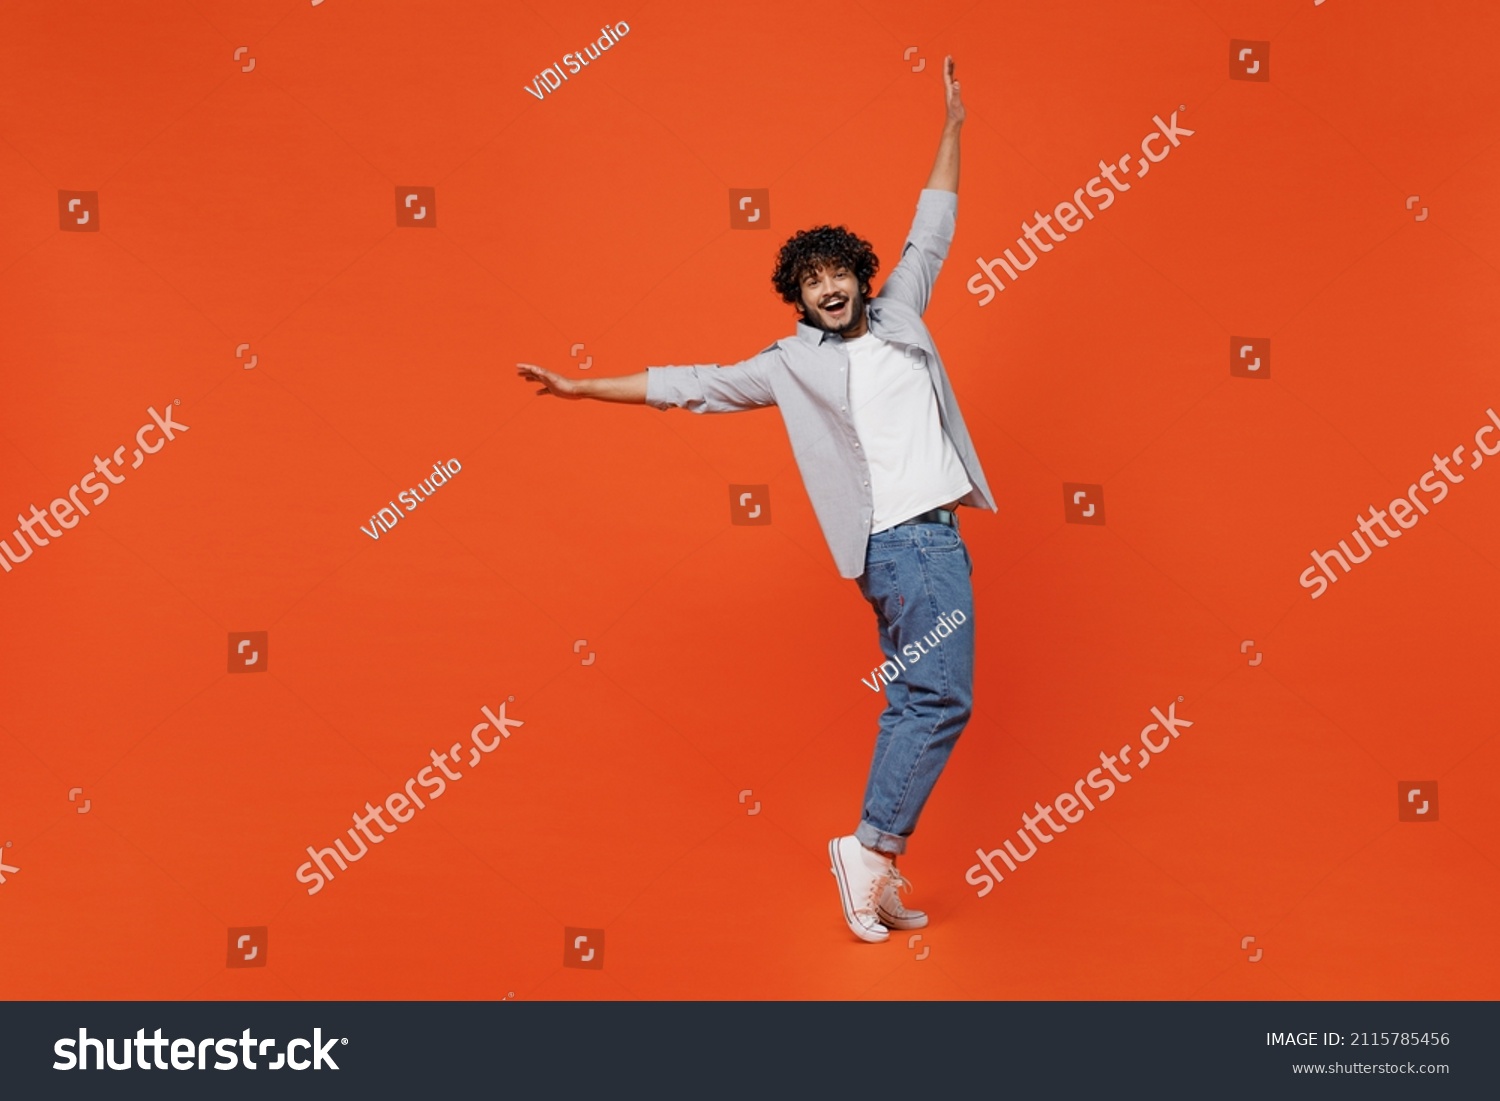 Full size body length smiling young bearded Indian man 20s years old wears blue shirt standing on toes dancing lean back have fun spreading hands isolated on plain orange background studio portrait #2115785456